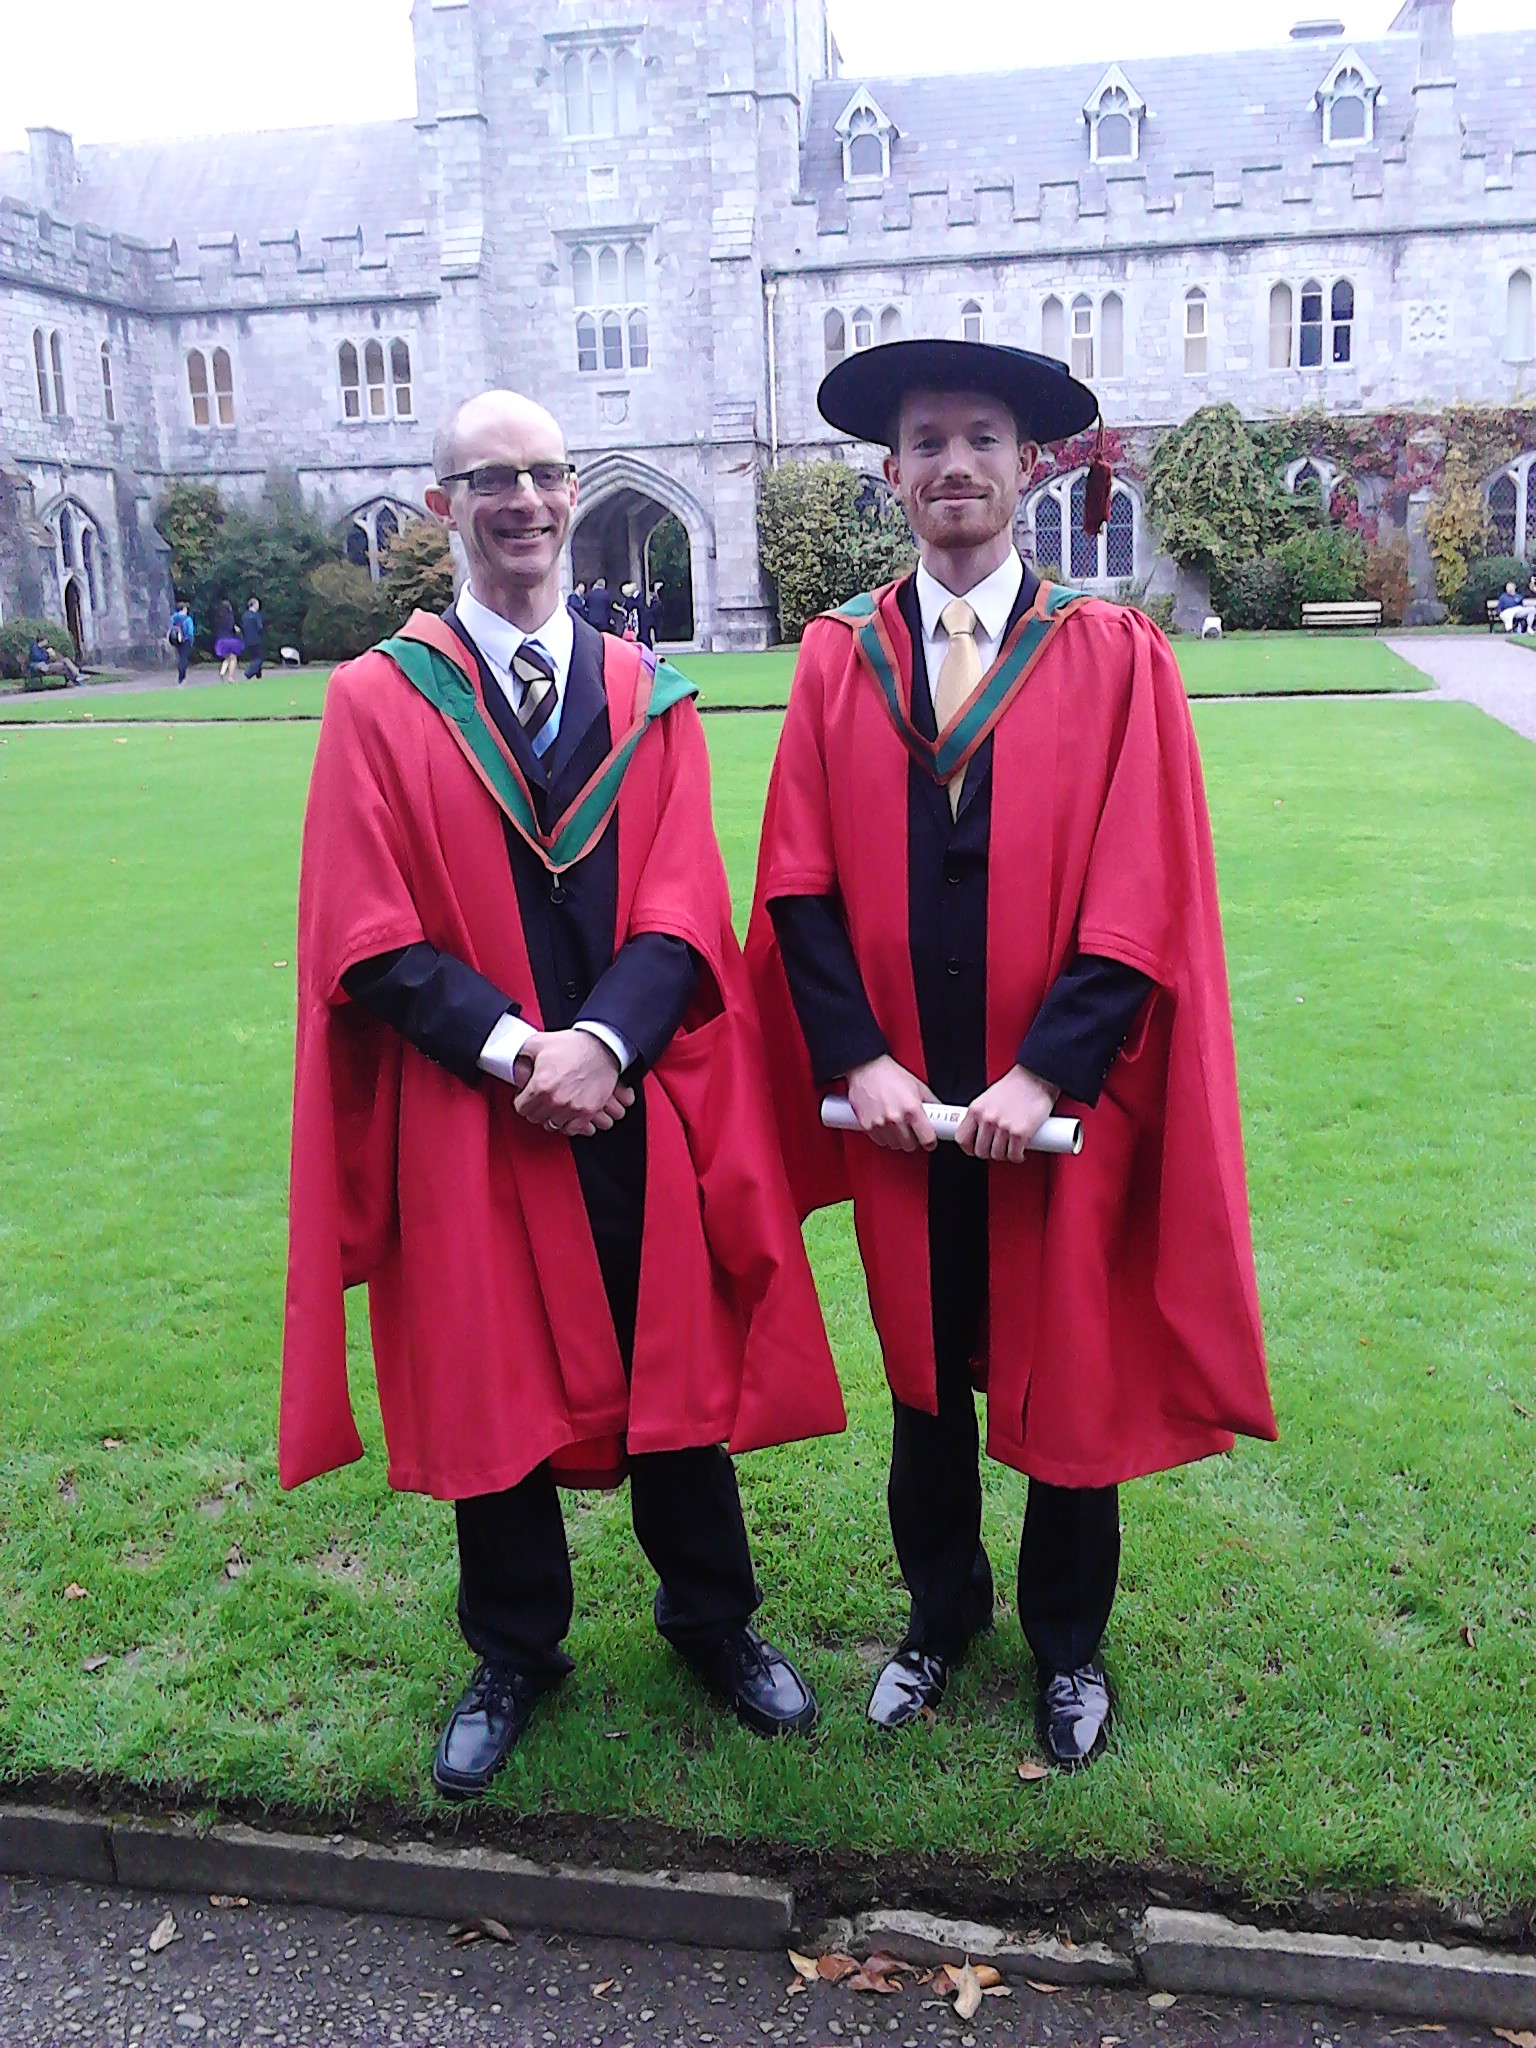 Over 40 Bachelor's, Master's and Doctoral students in Civil & Environmental Engineering were conferred at UCC's recent Autumn Conferrings ceremony.